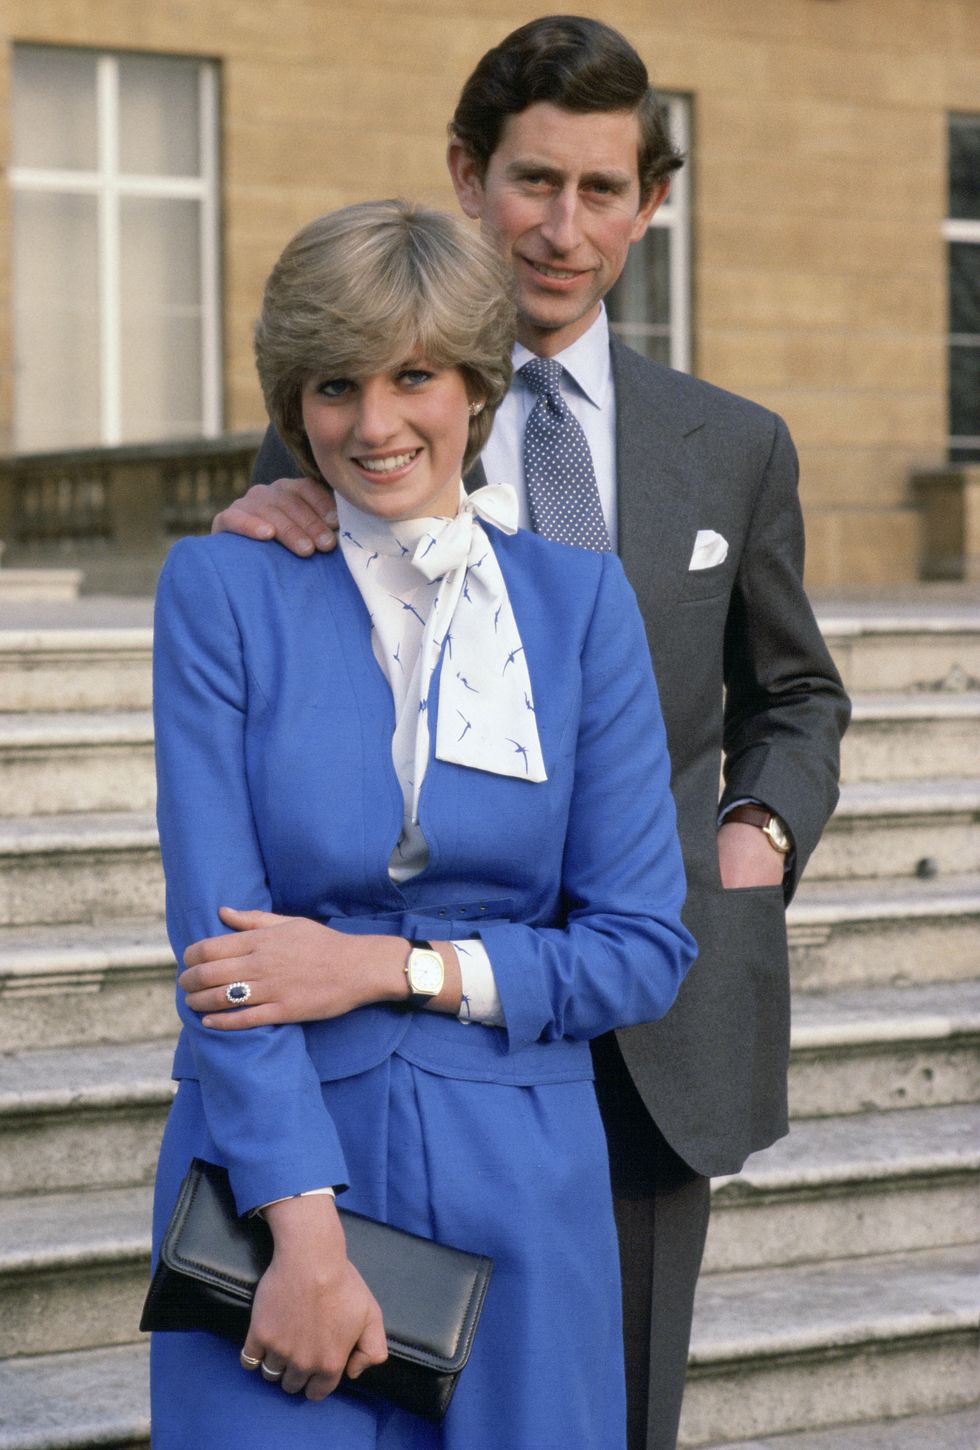 Prince Charles and Lady Diana Spencer at Buckingham Palace on the day they announced their engagement, February 24, 1981